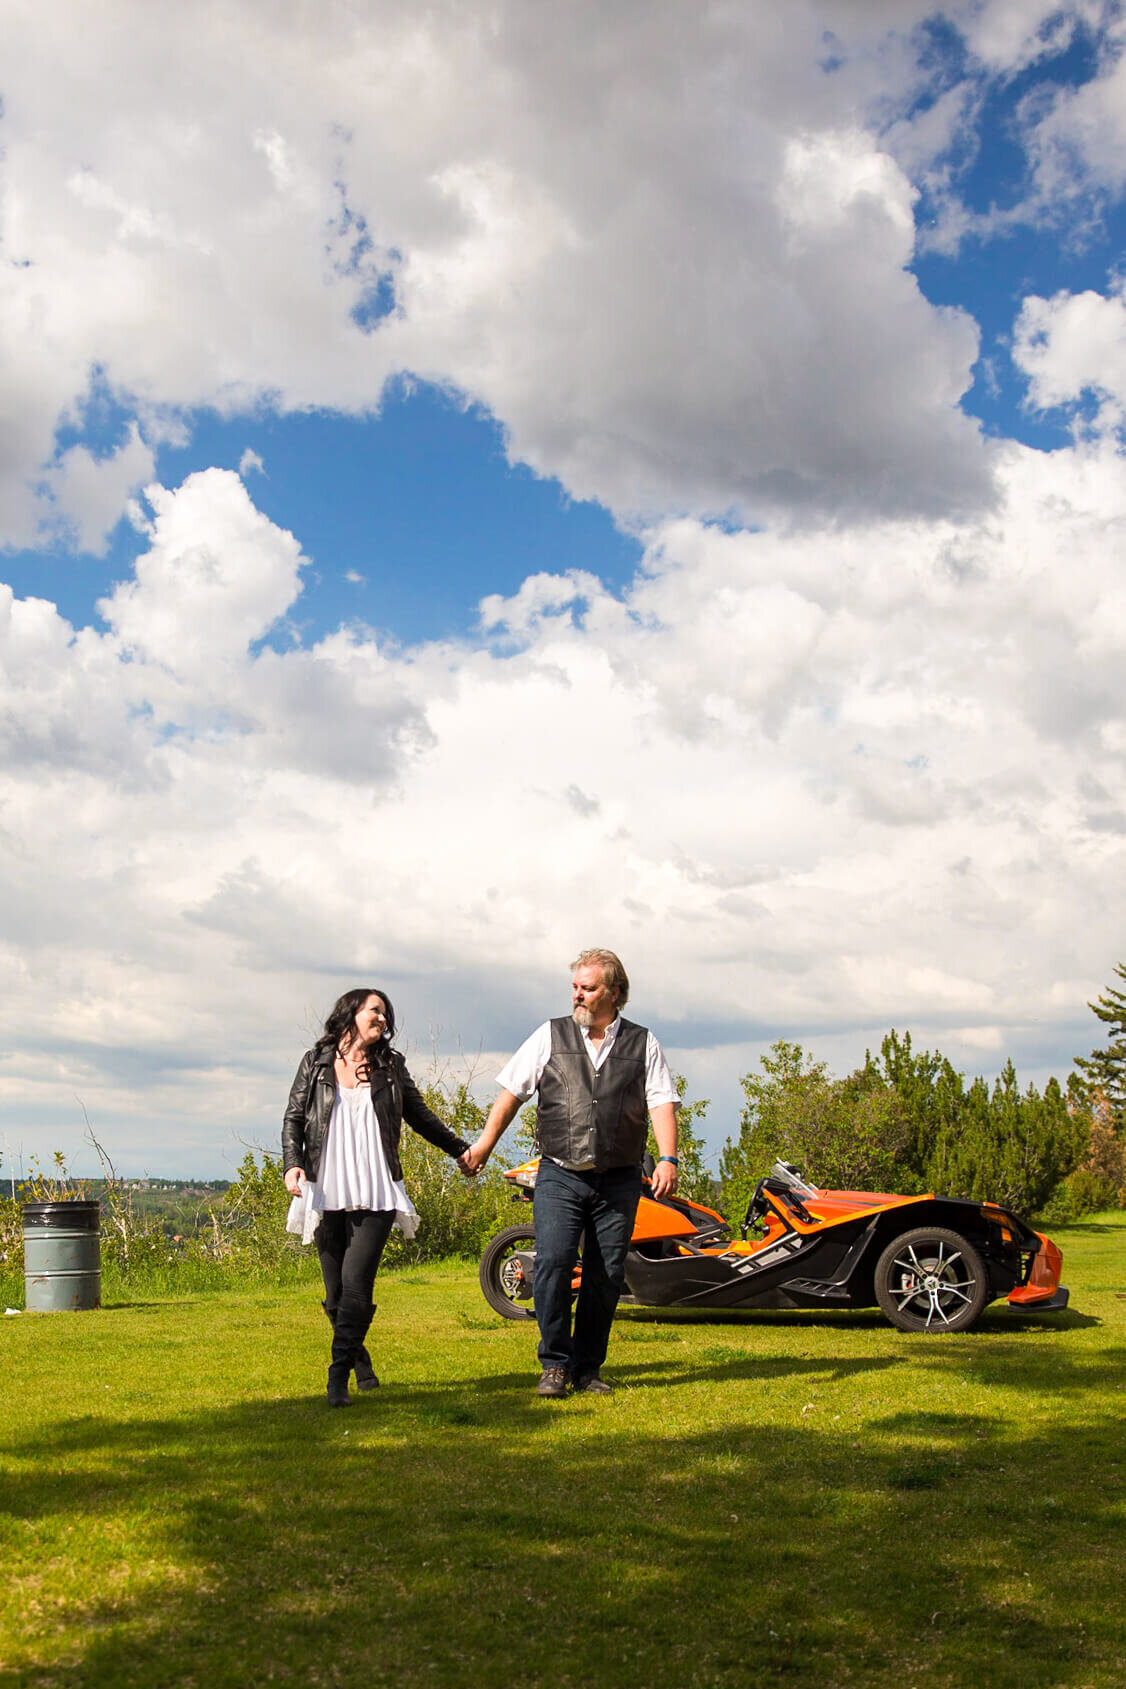 Engagement session with special car in background